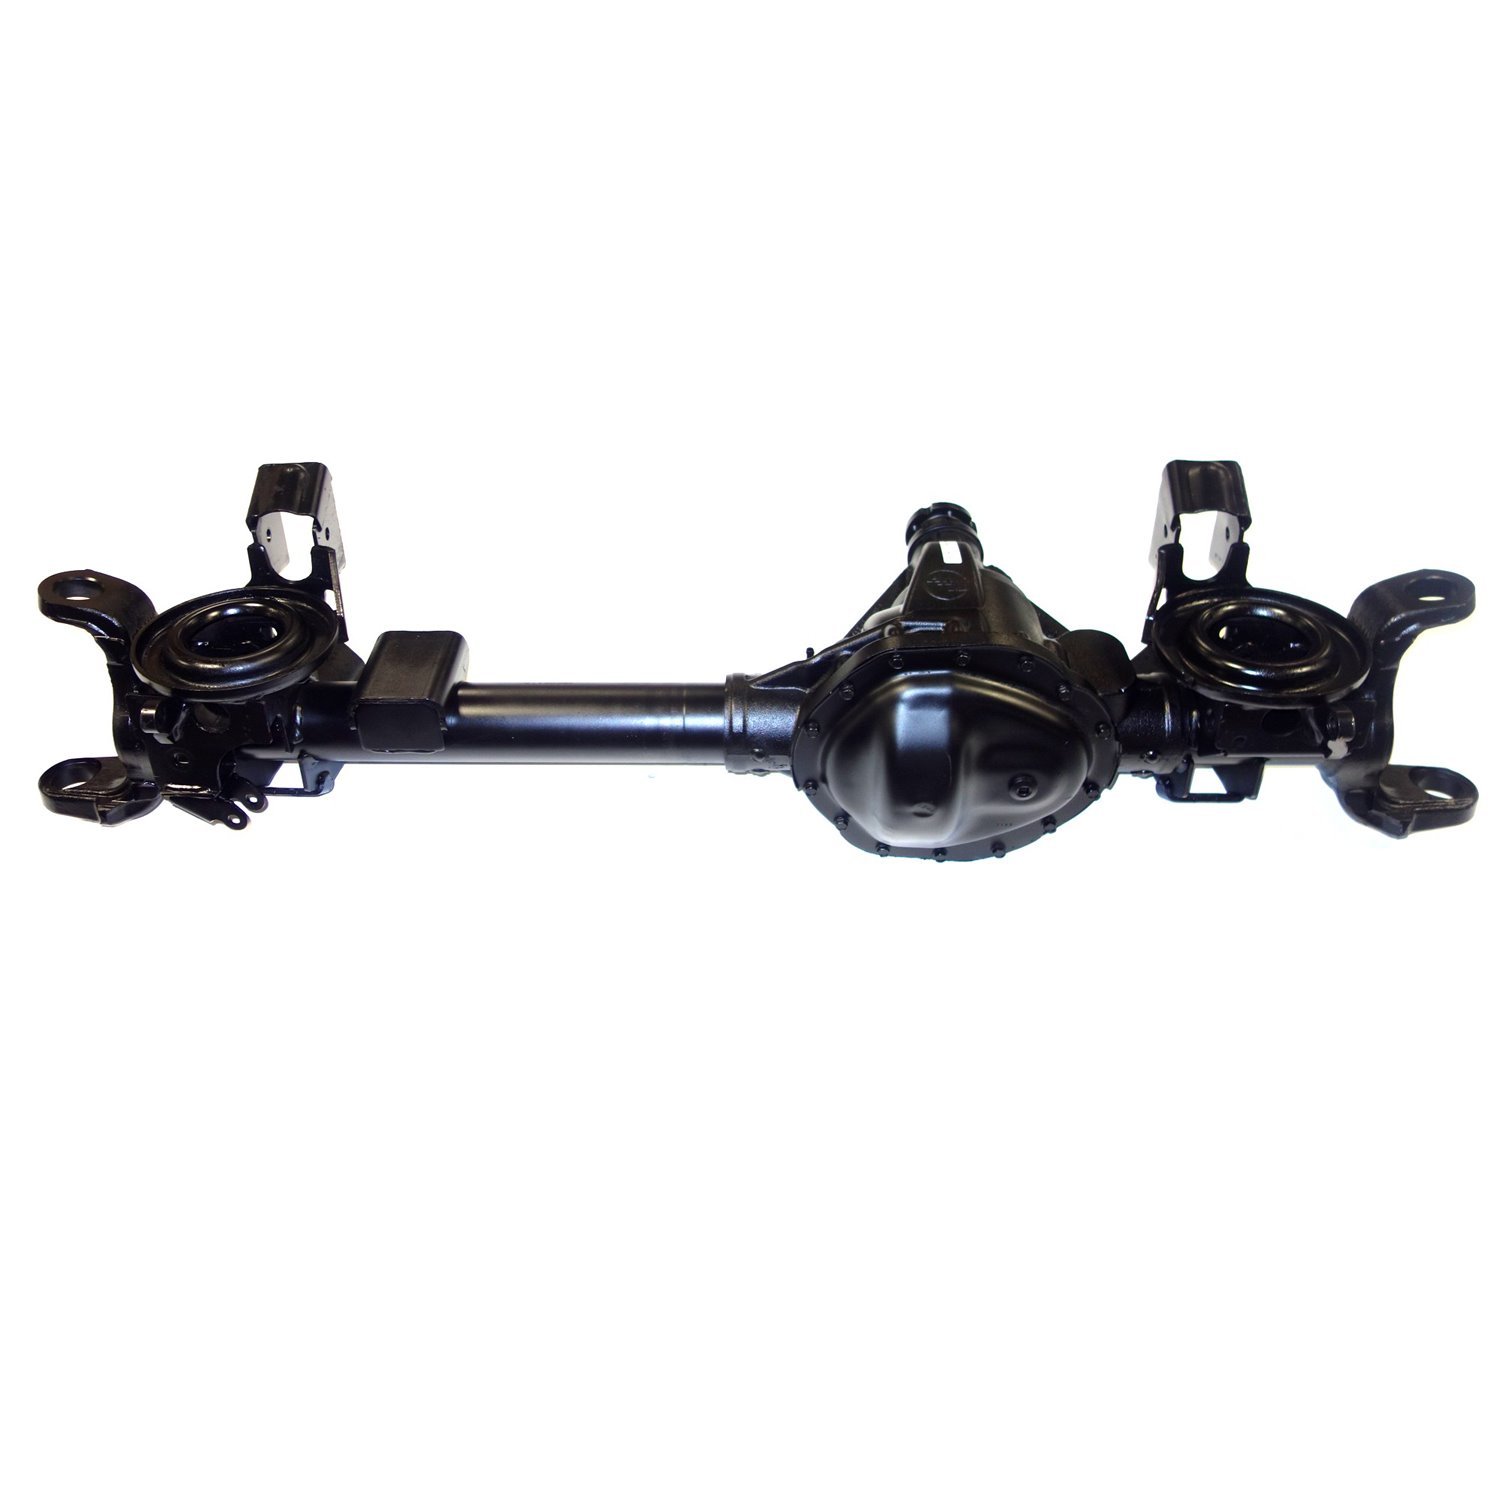 Remanufactured Chy 9.25" Axle Assembly for 2008 Ram 1500 Mega Cab, 2500 & 3500, 3.42